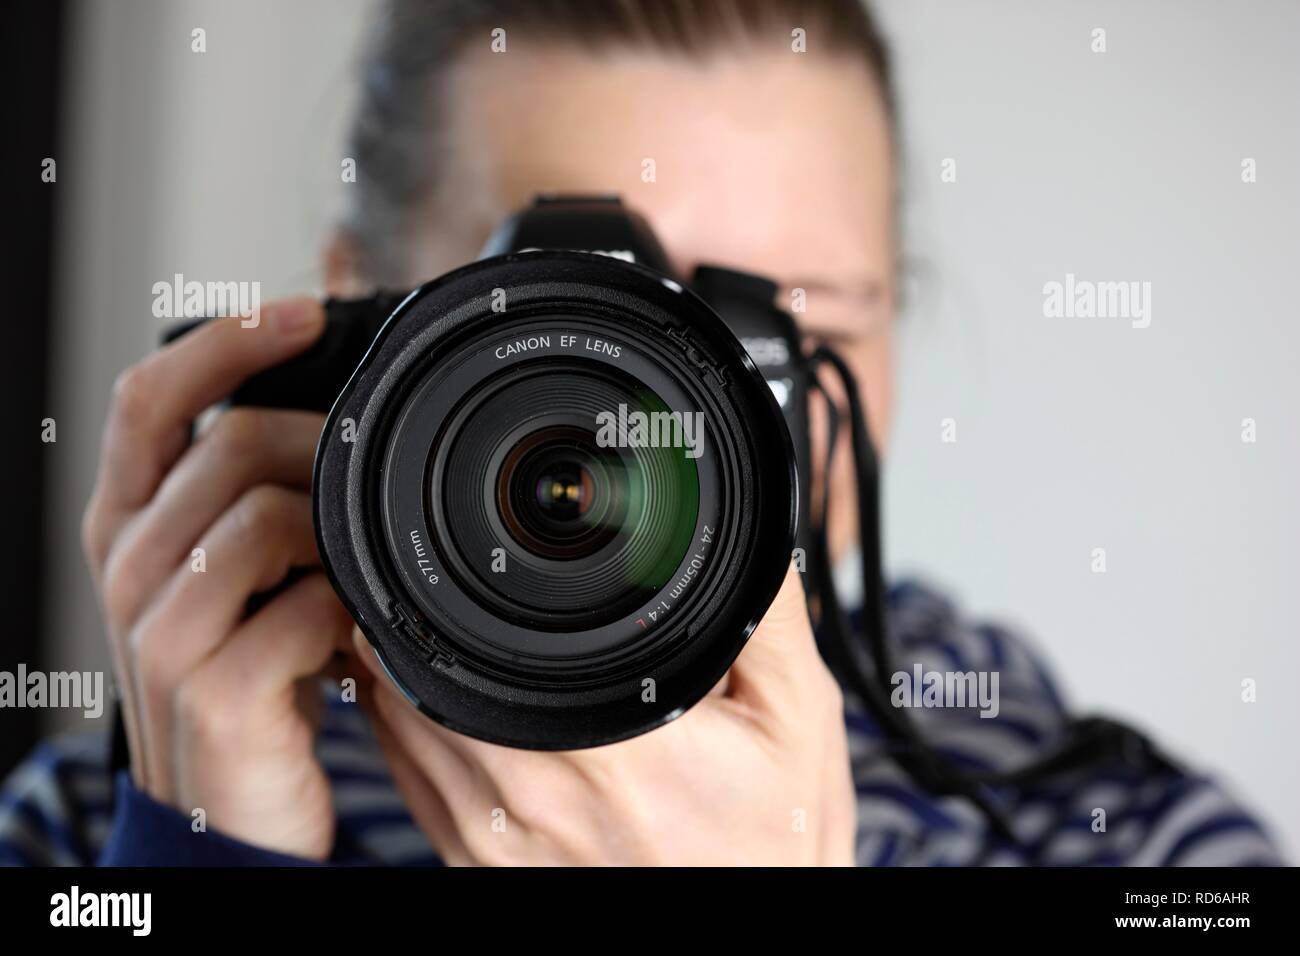 Woman looking through the viewfinder of a digital SLR camera Stock Photo